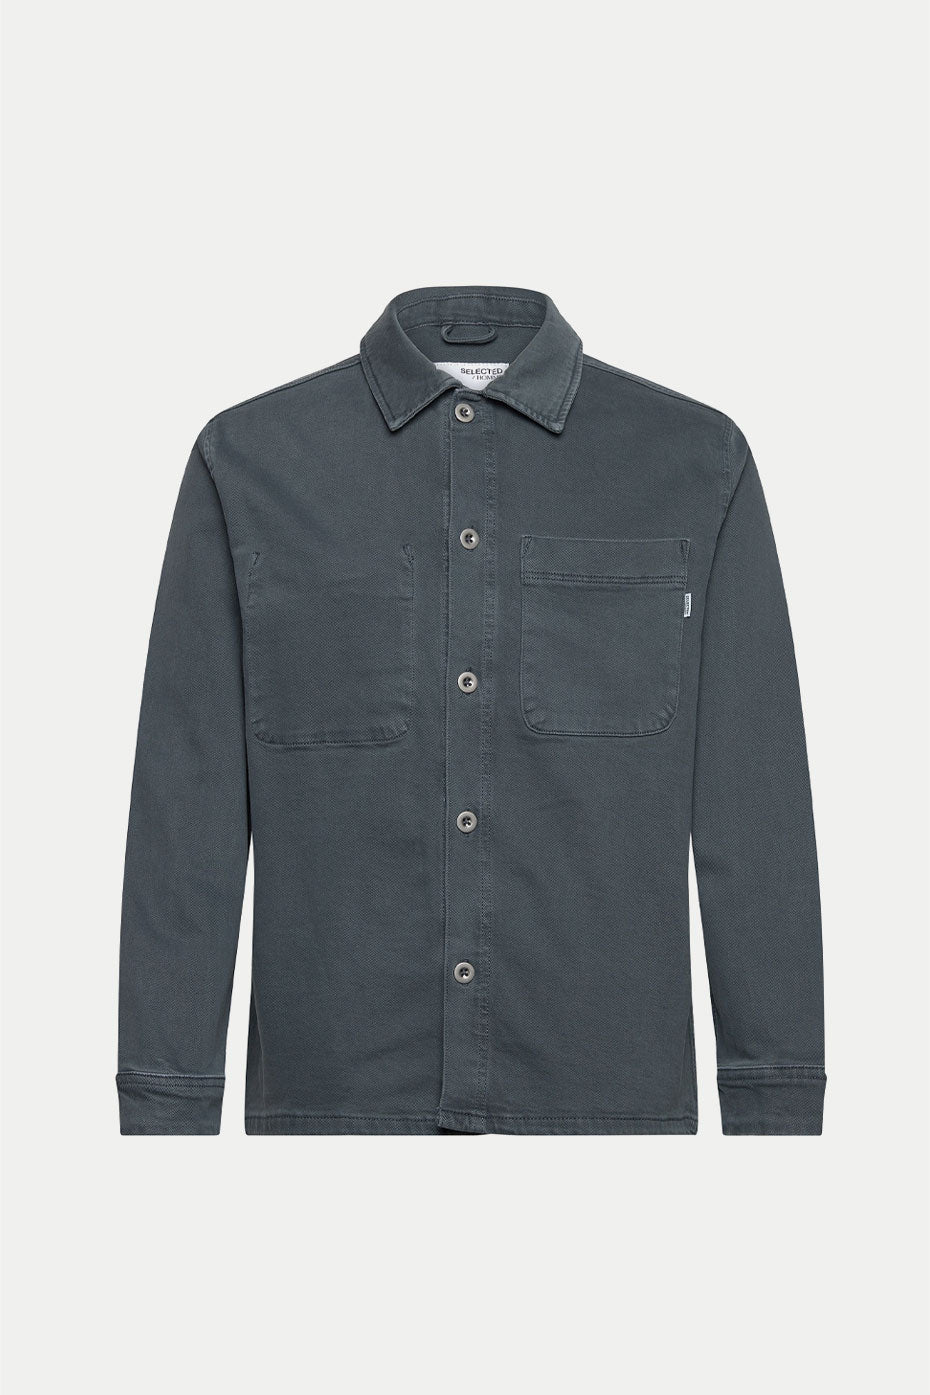 Selected Homme Stormy Weather Jake Overshirt